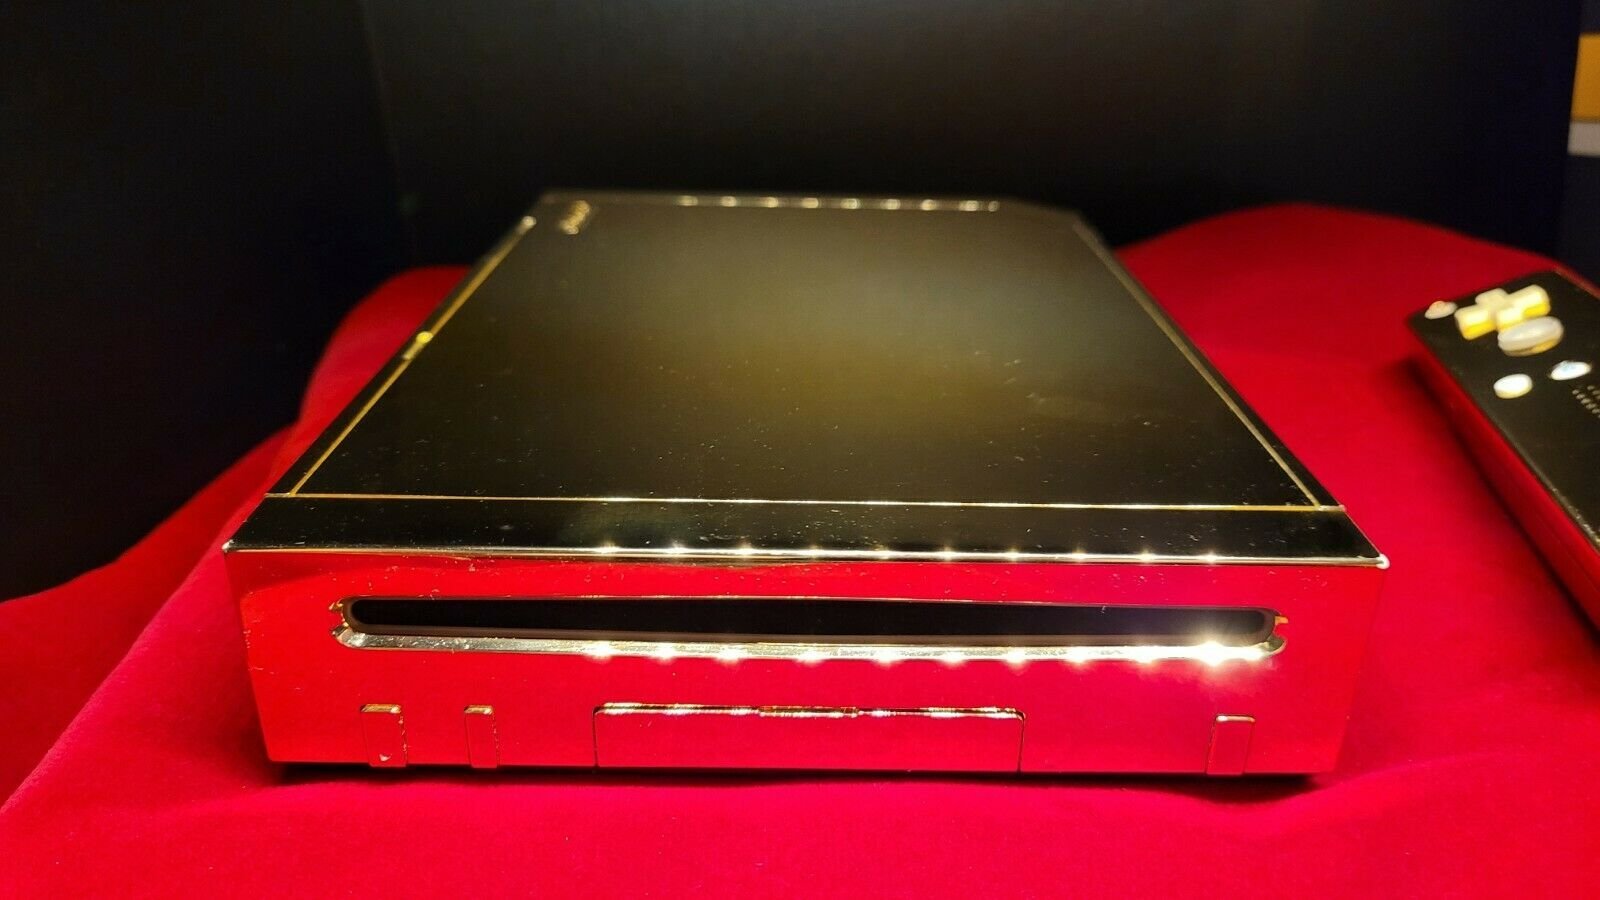 Queen Elizabeth II’s 24K Gold Nintendo Wii Is Up For Sale & We Have So Many Questions